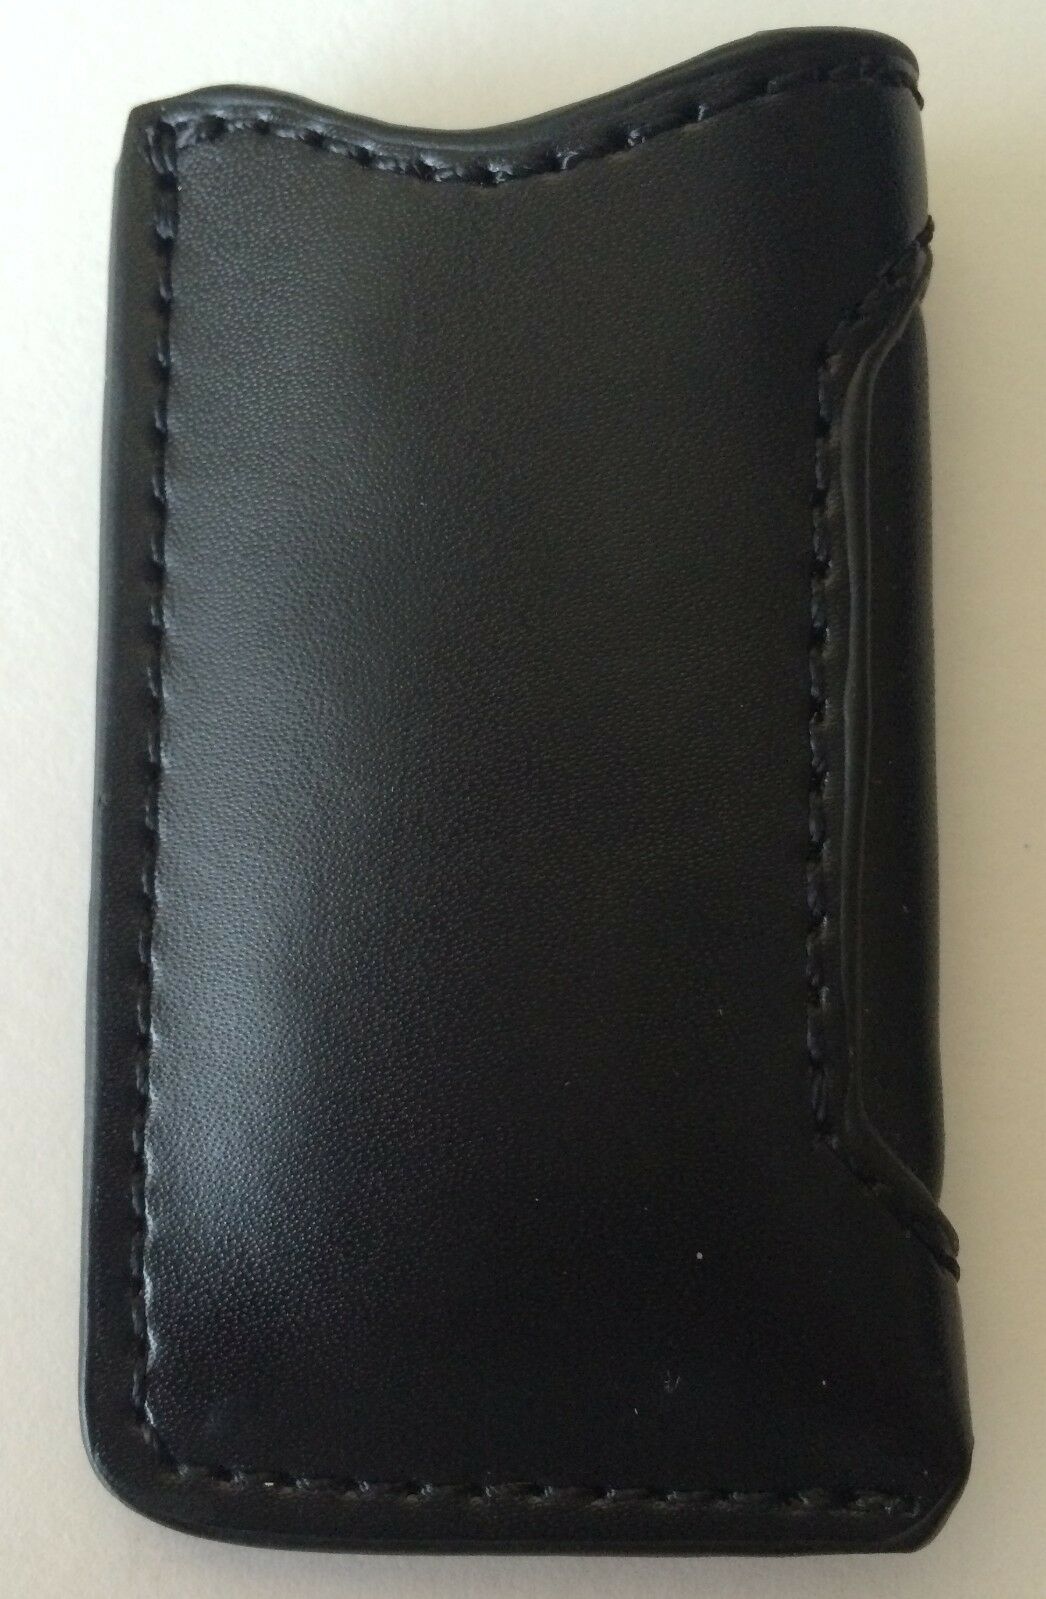 Black Leather Case Pouch For S.t. Dupont Slim 7 Lighter, New In Box